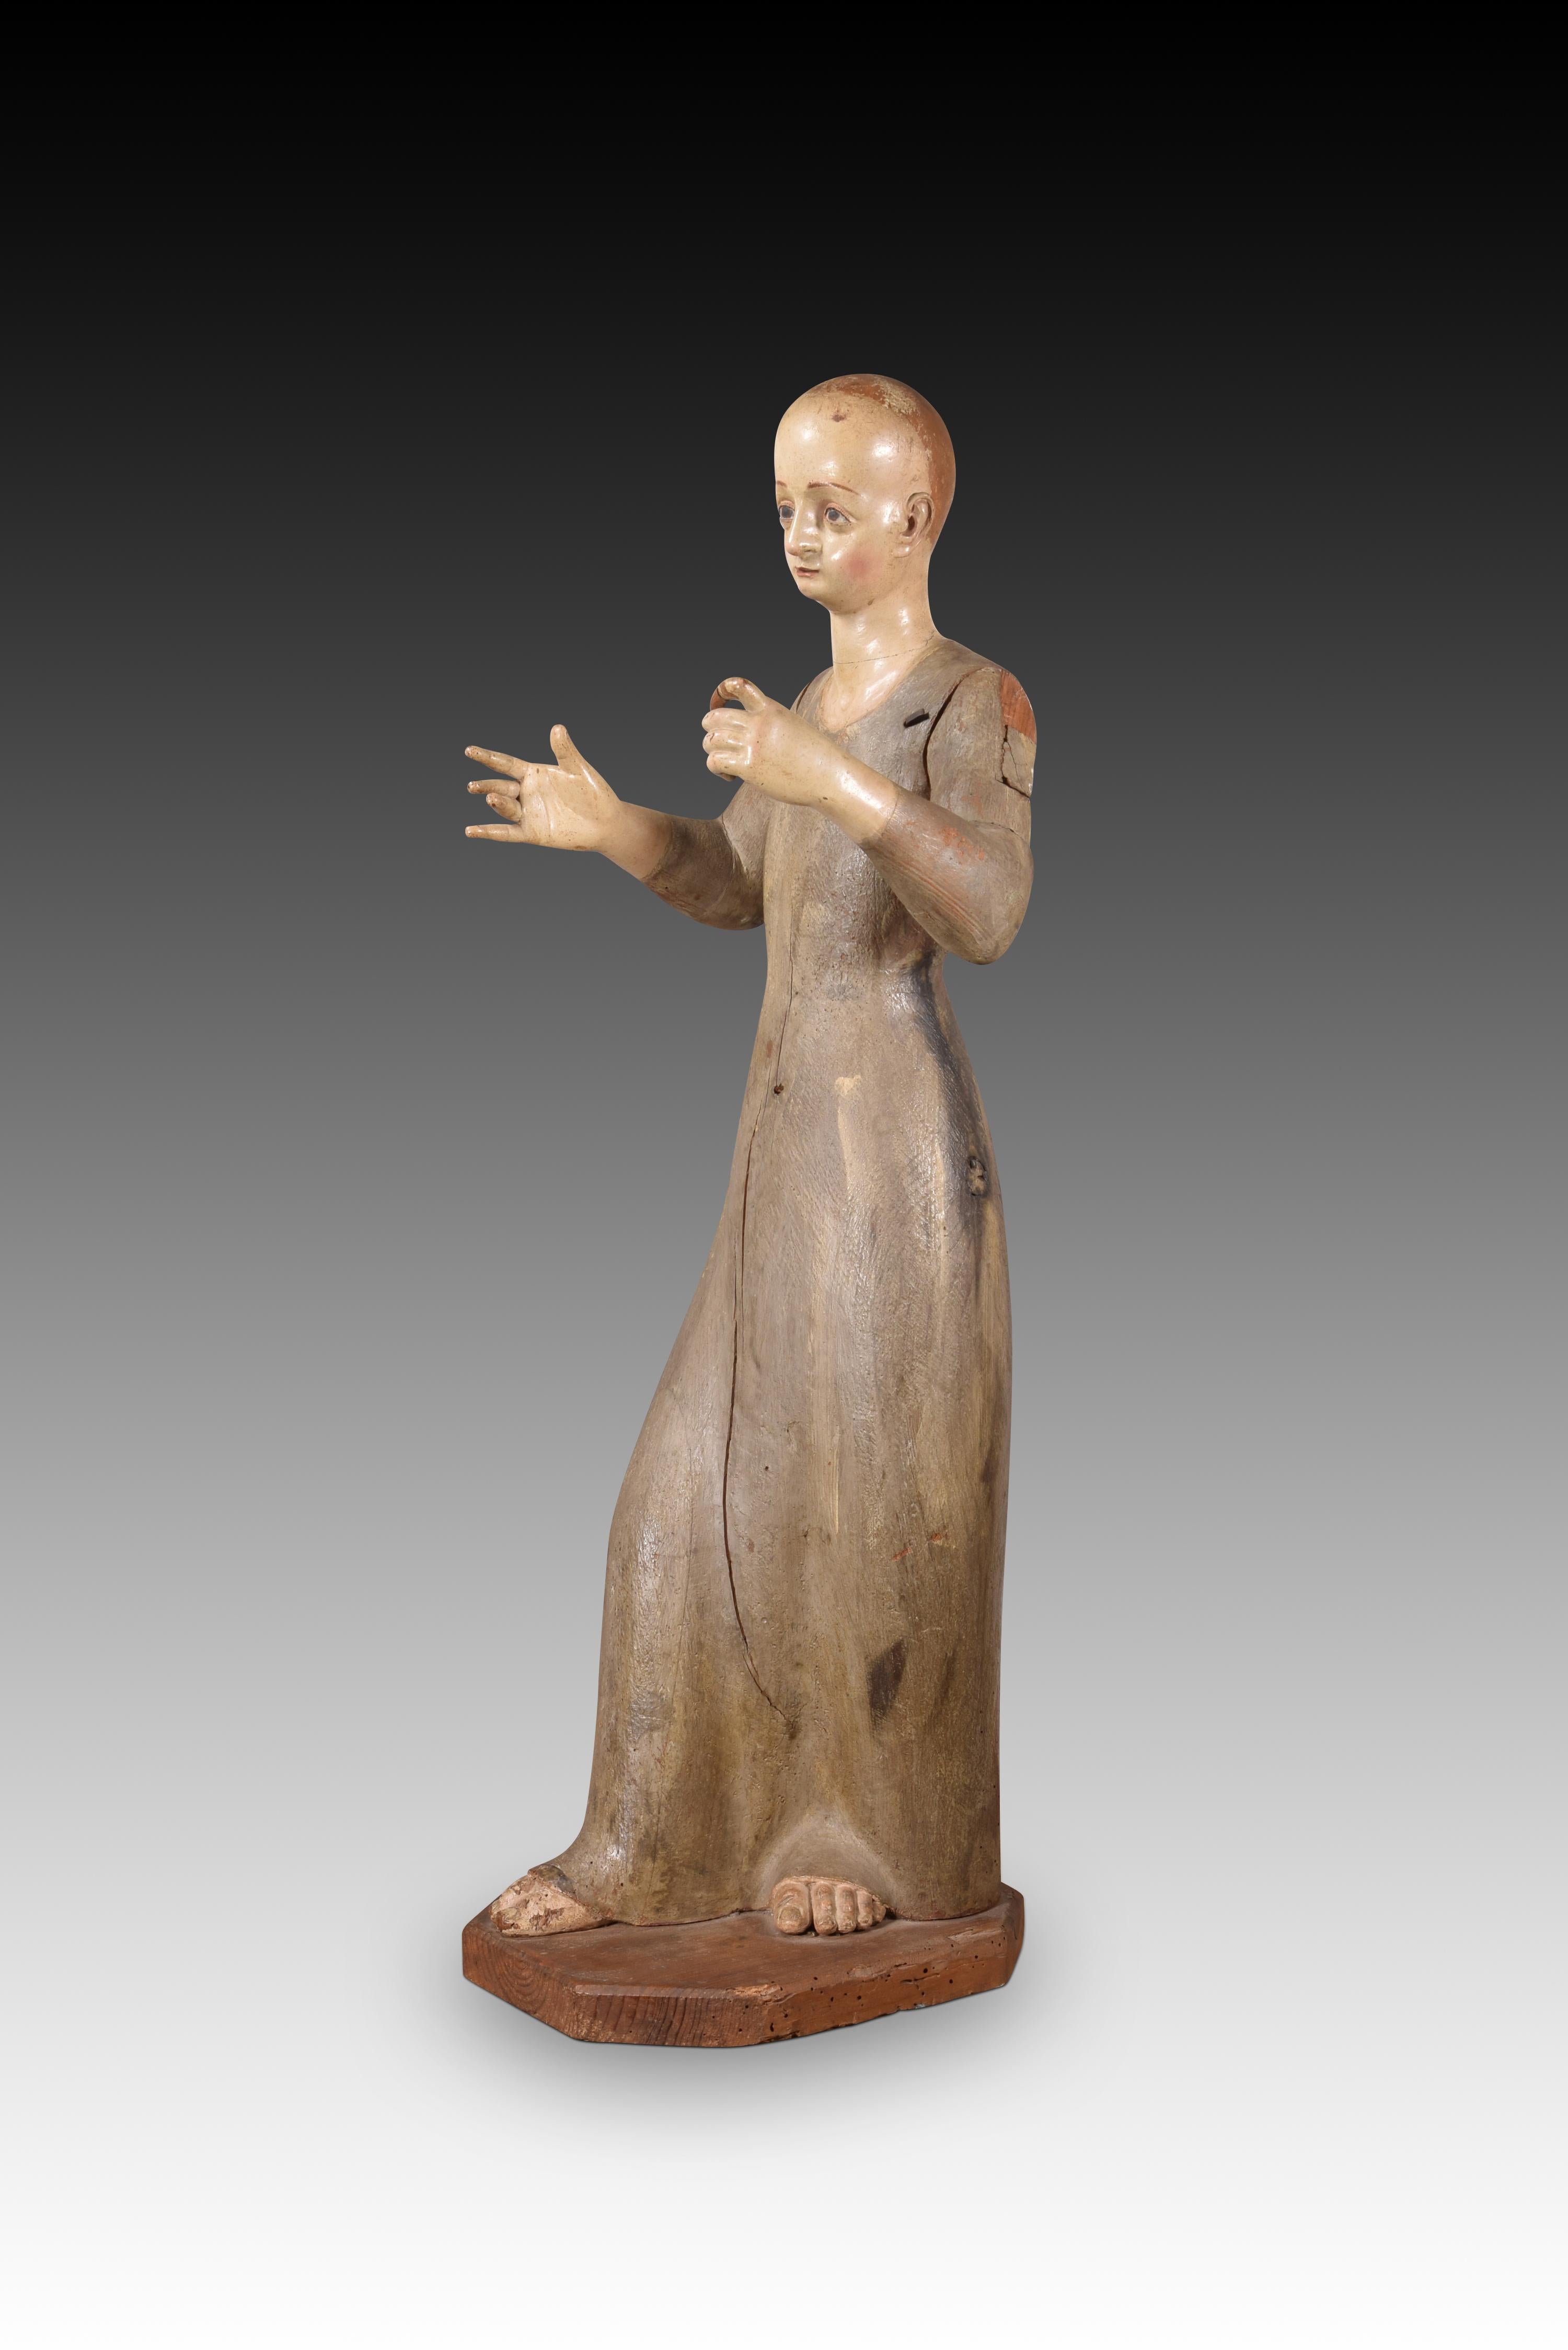 Saint or Virgin to dress. Wood, metal. Spanish school, 17th century.
 It has faults. 
The female figure stands (with her right leg forward) on a small polygonal base. Made of partially polychrome wood, note that the feet (which show through the